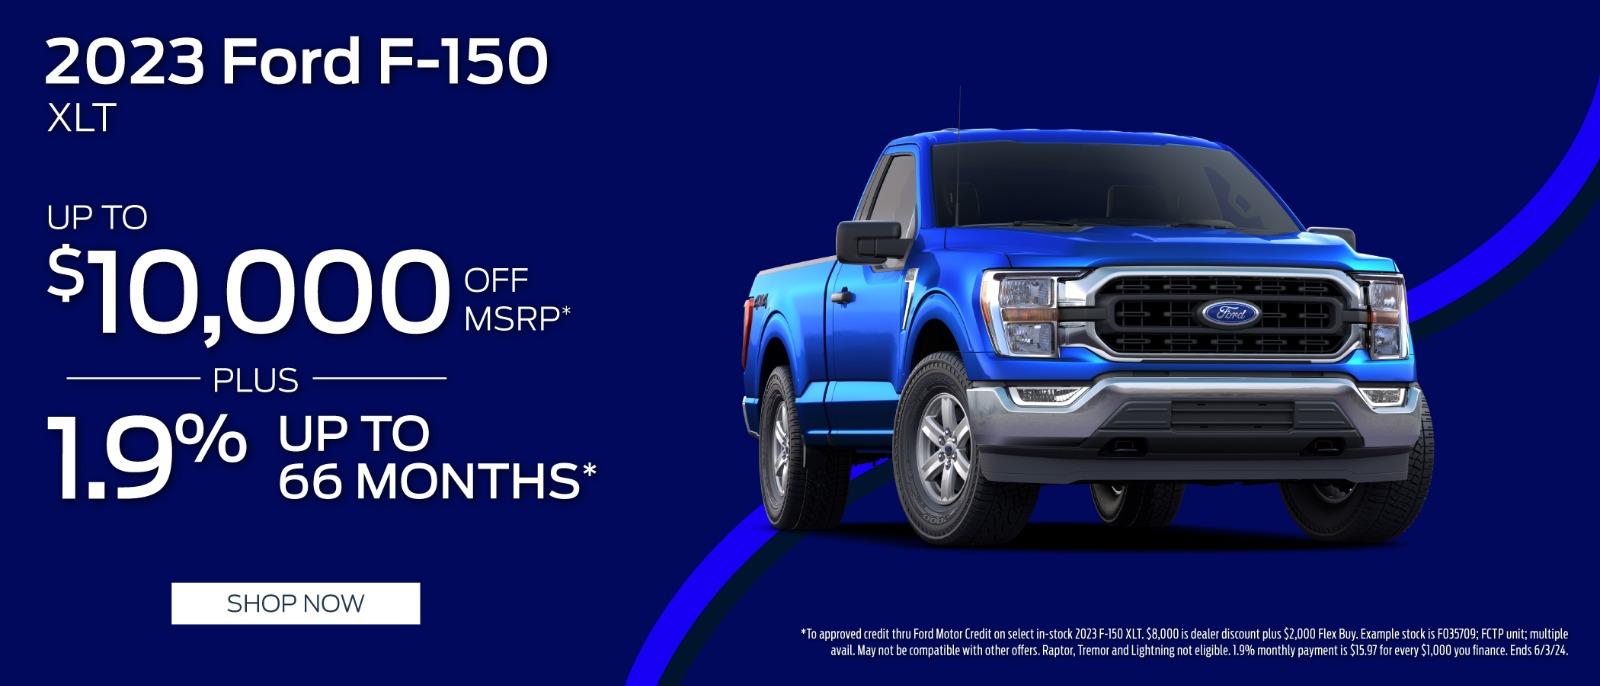 2023 Ford F-150  up to $10,000 off MSRP Plus1.9% up to 66 months